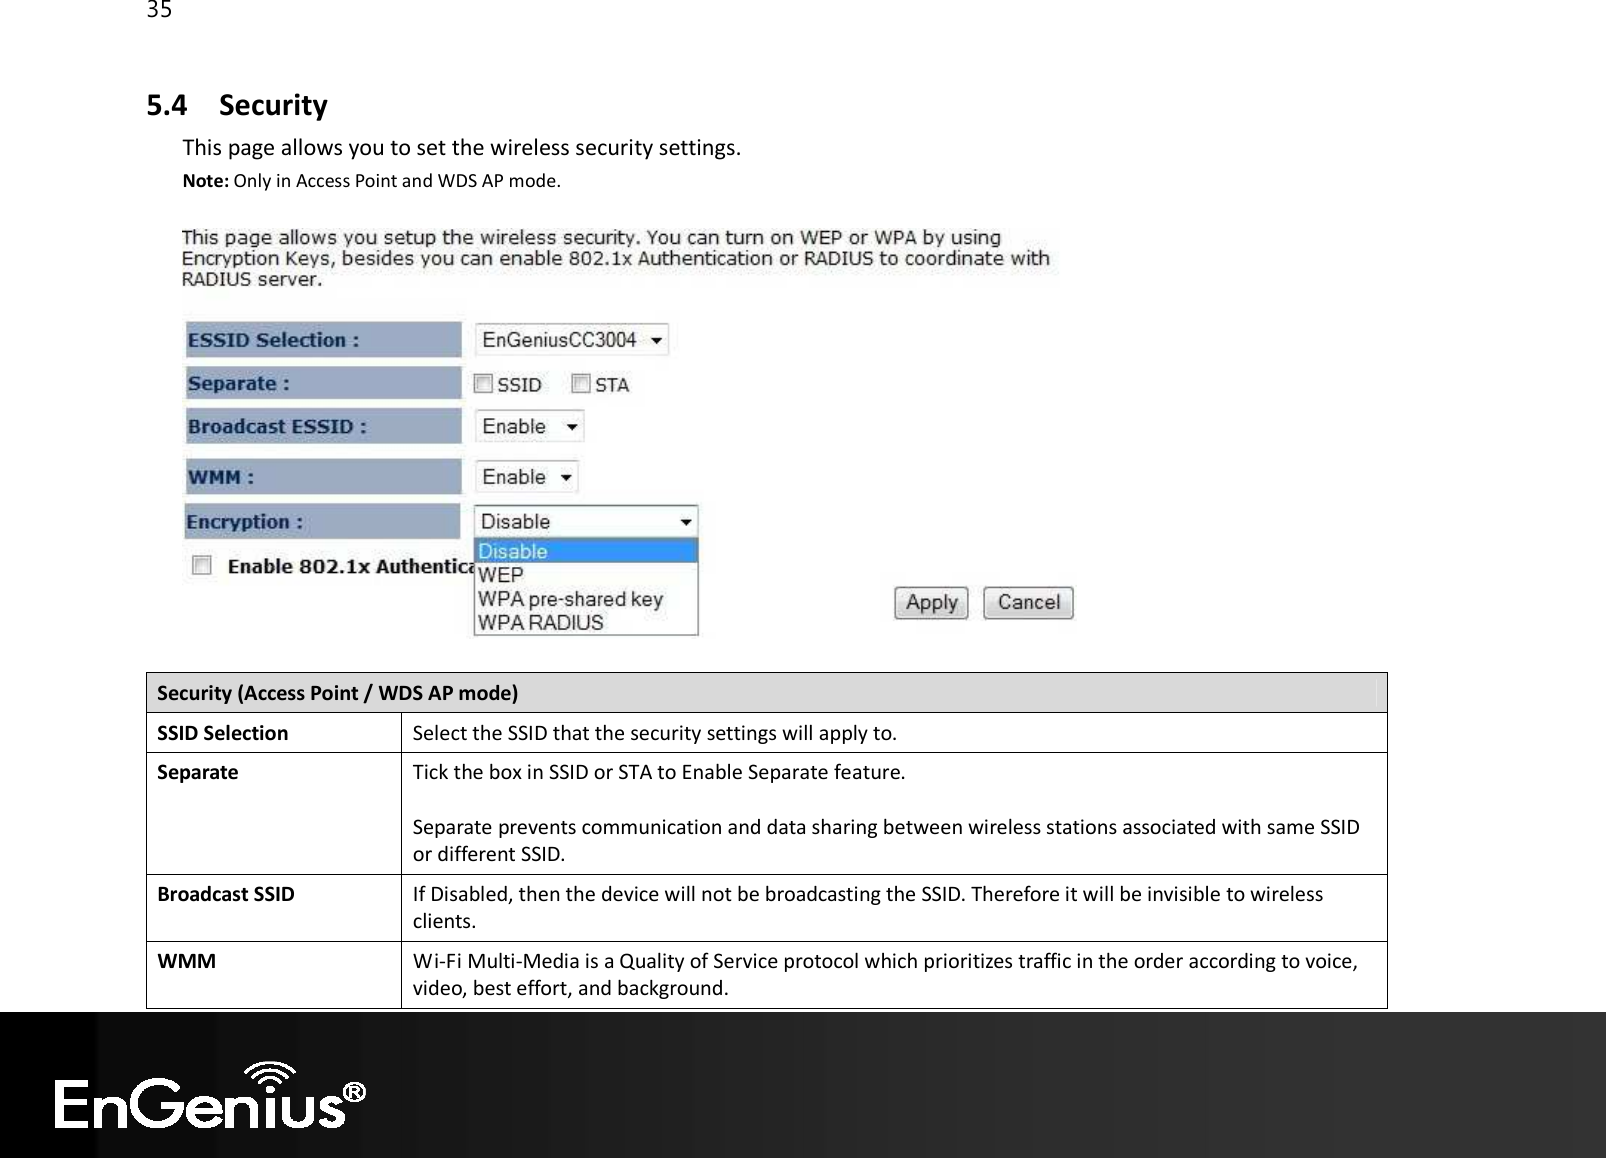 35  5.4 Security This page allows you to set the wireless security settings. Note: Only in Access Point and WDS AP mode.    Security (Access Point / WDS AP mode) SSID Selection Select the SSID that the security settings will apply to. Separate Tick the box in SSID or STA to Enable Separate feature.  Separate prevents communication and data sharing between wireless stations associated with same SSID or different SSID. Broadcast SSID If Disabled, then the device will not be broadcasting the SSID. Therefore it will be invisible to wireless clients. WMM Wi-Fi Multi-Media is a Quality of Service protocol which prioritizes traffic in the order according to voice, video, best effort, and background. 